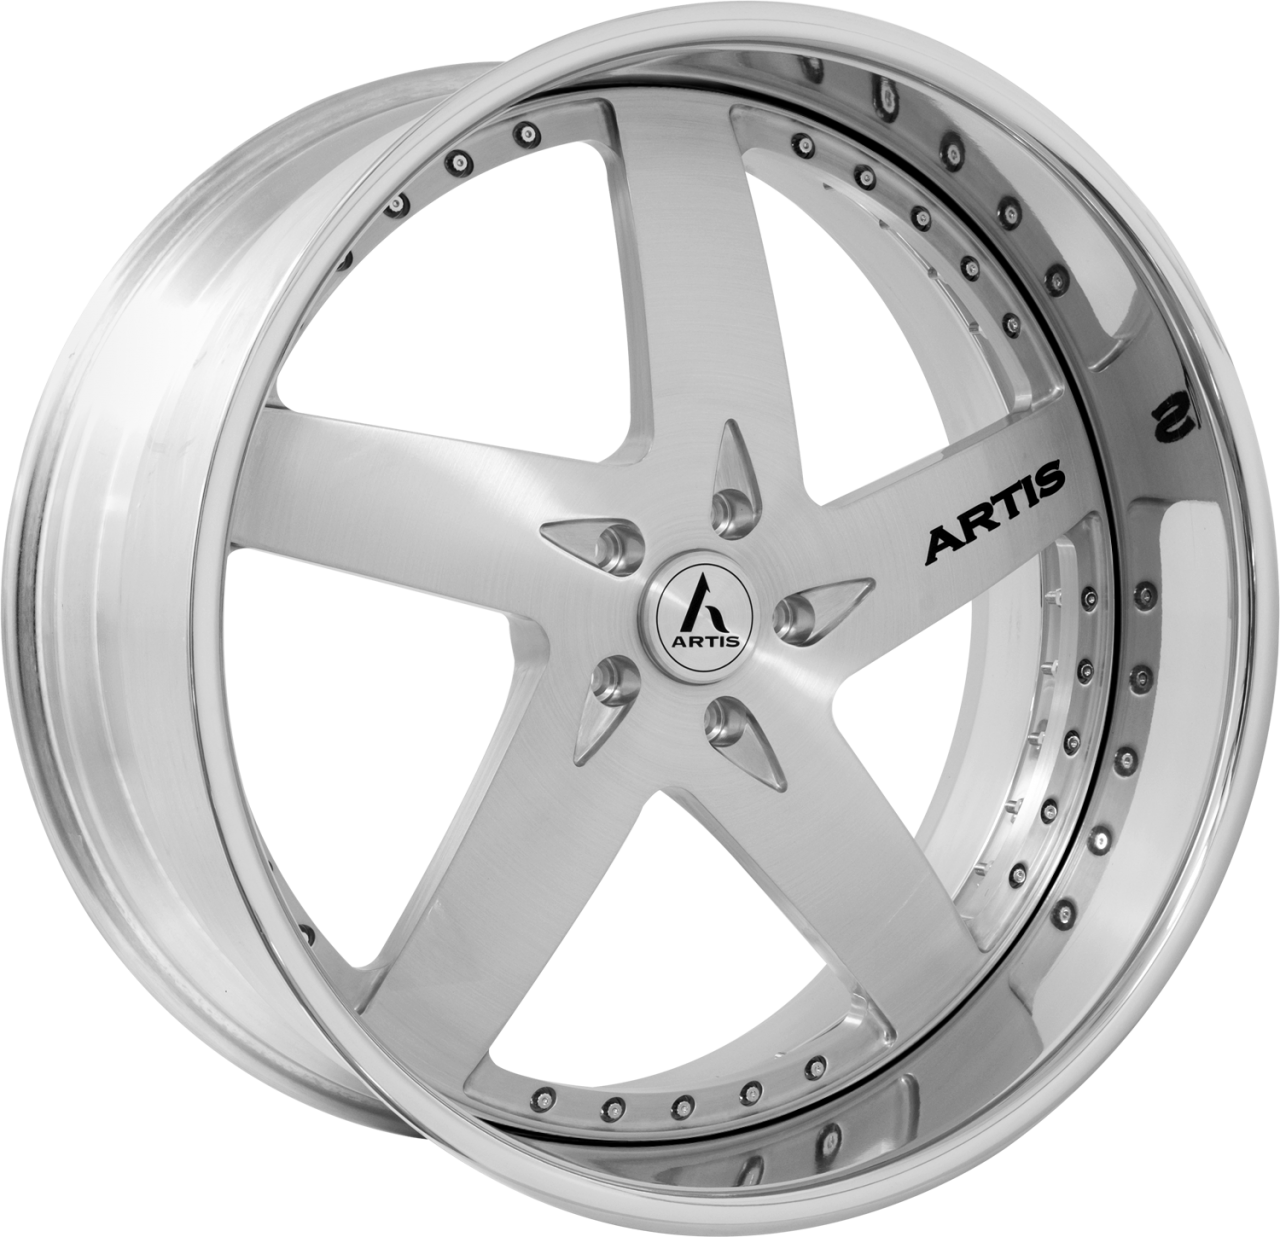 Artis Forged Bullet wheel with Brushed finish